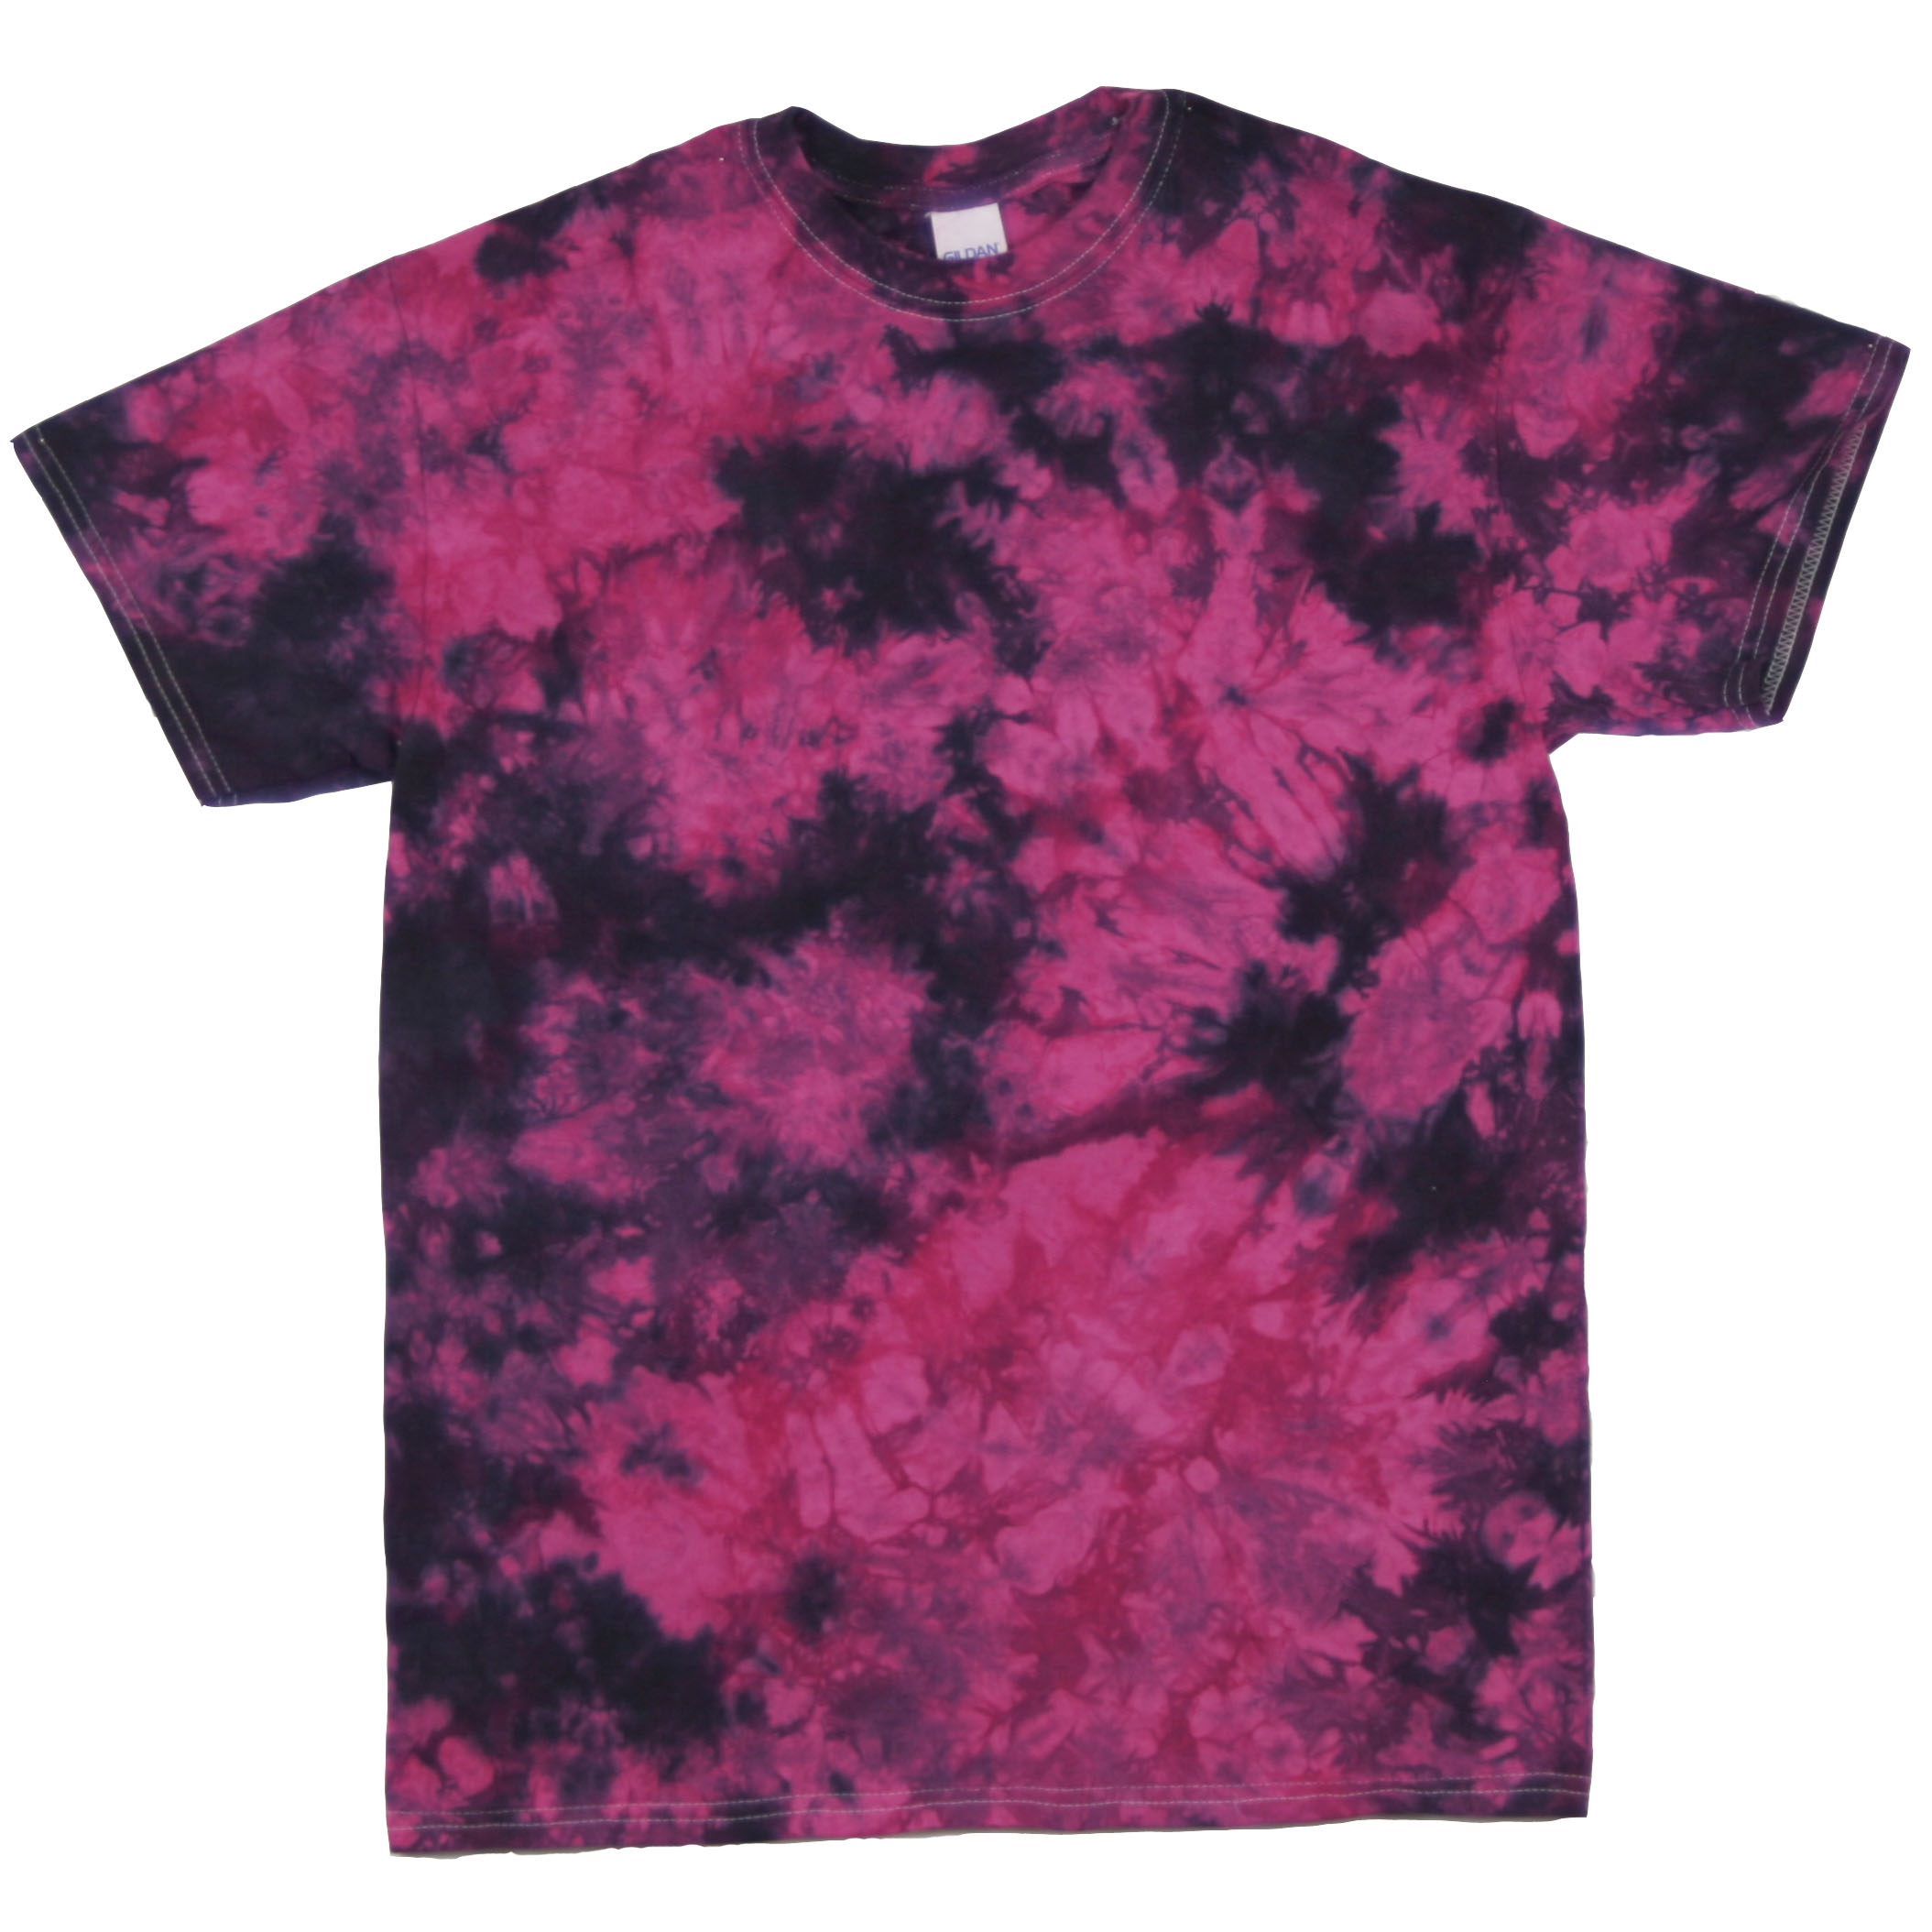 Infusion Black/Pink